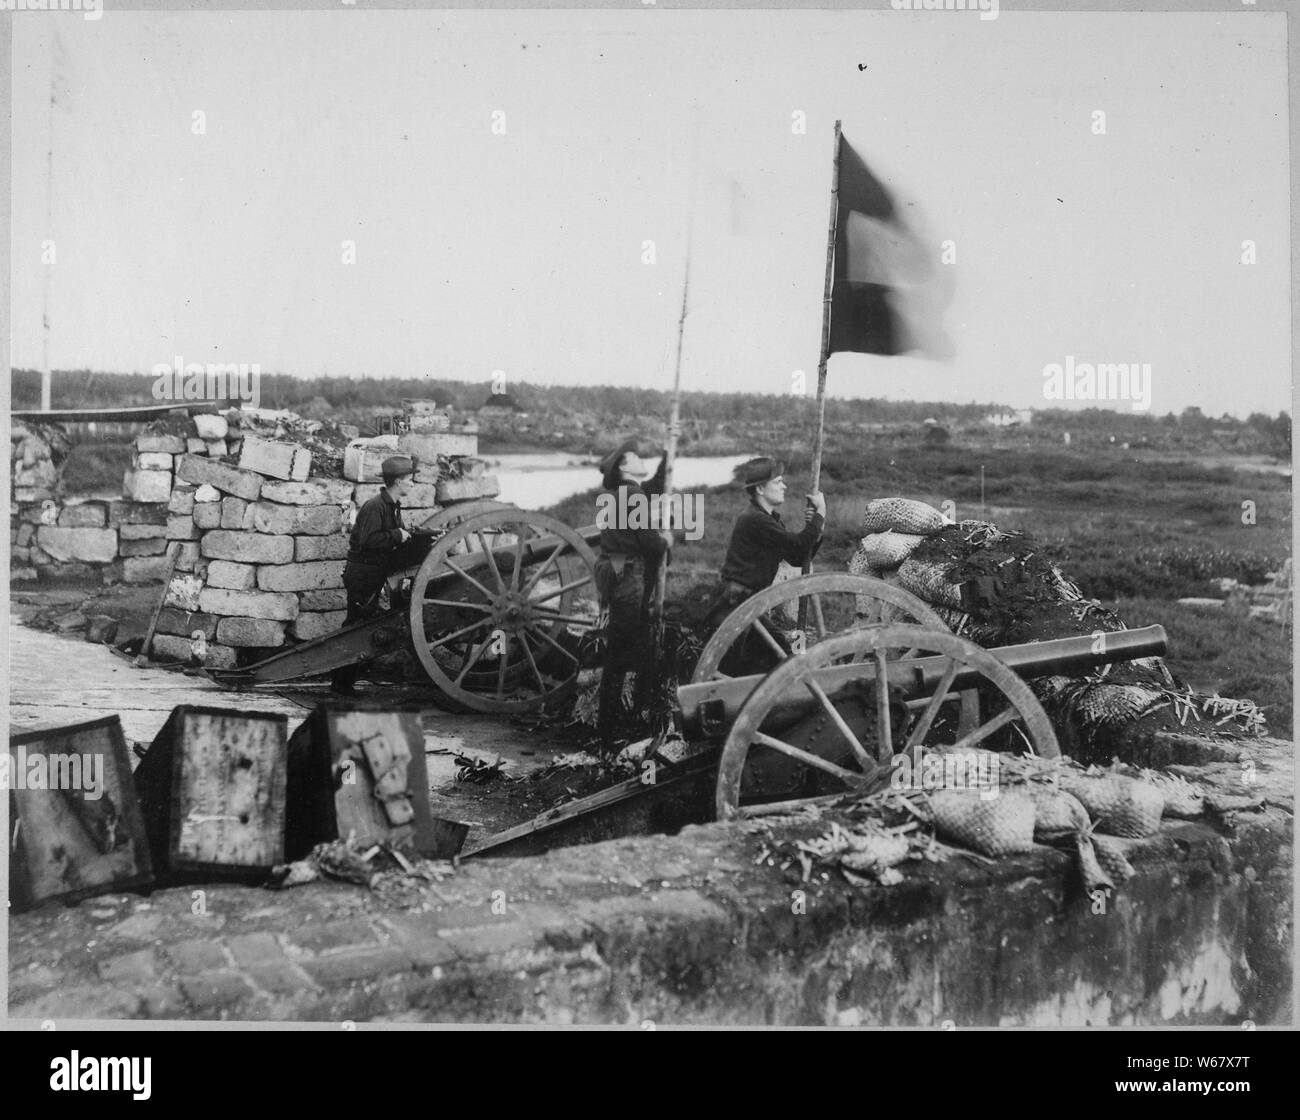 Photograph of American Flag Hoisted at Fort Malate, ca. 1898; Scope and content:  Original caption: Fort Malate-On left is staff flying American flag, which was hoisted (replacing Spanish colors) during action of August 13, 1898. Greely Collection. General notes:  Use War and Conflict Number 283 when ordering a reproduction or requesting information about this image. Stock Photo